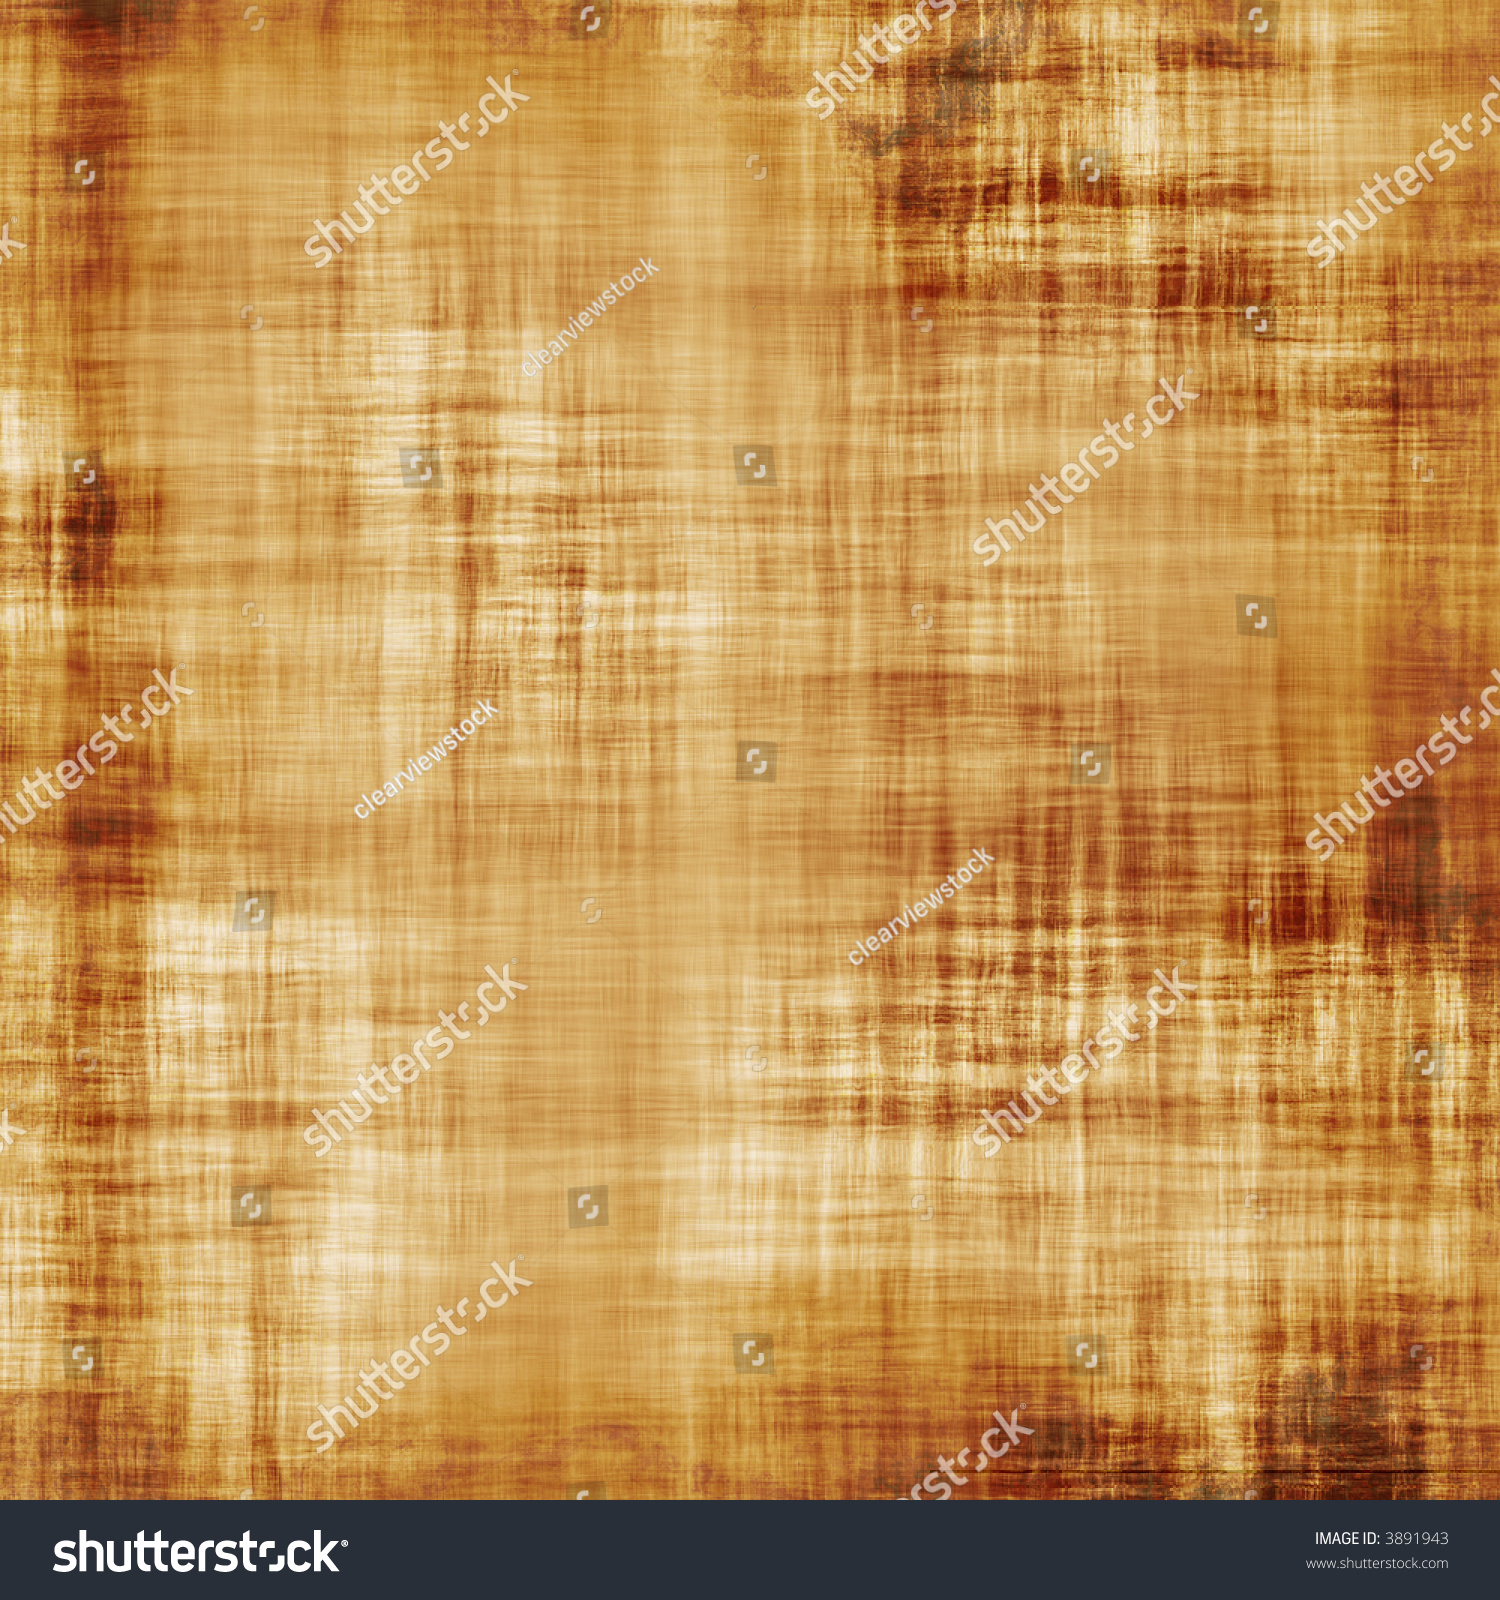 Large Image Old Worn Fabric Paper Stock Photo 3891943 - Shutterstock